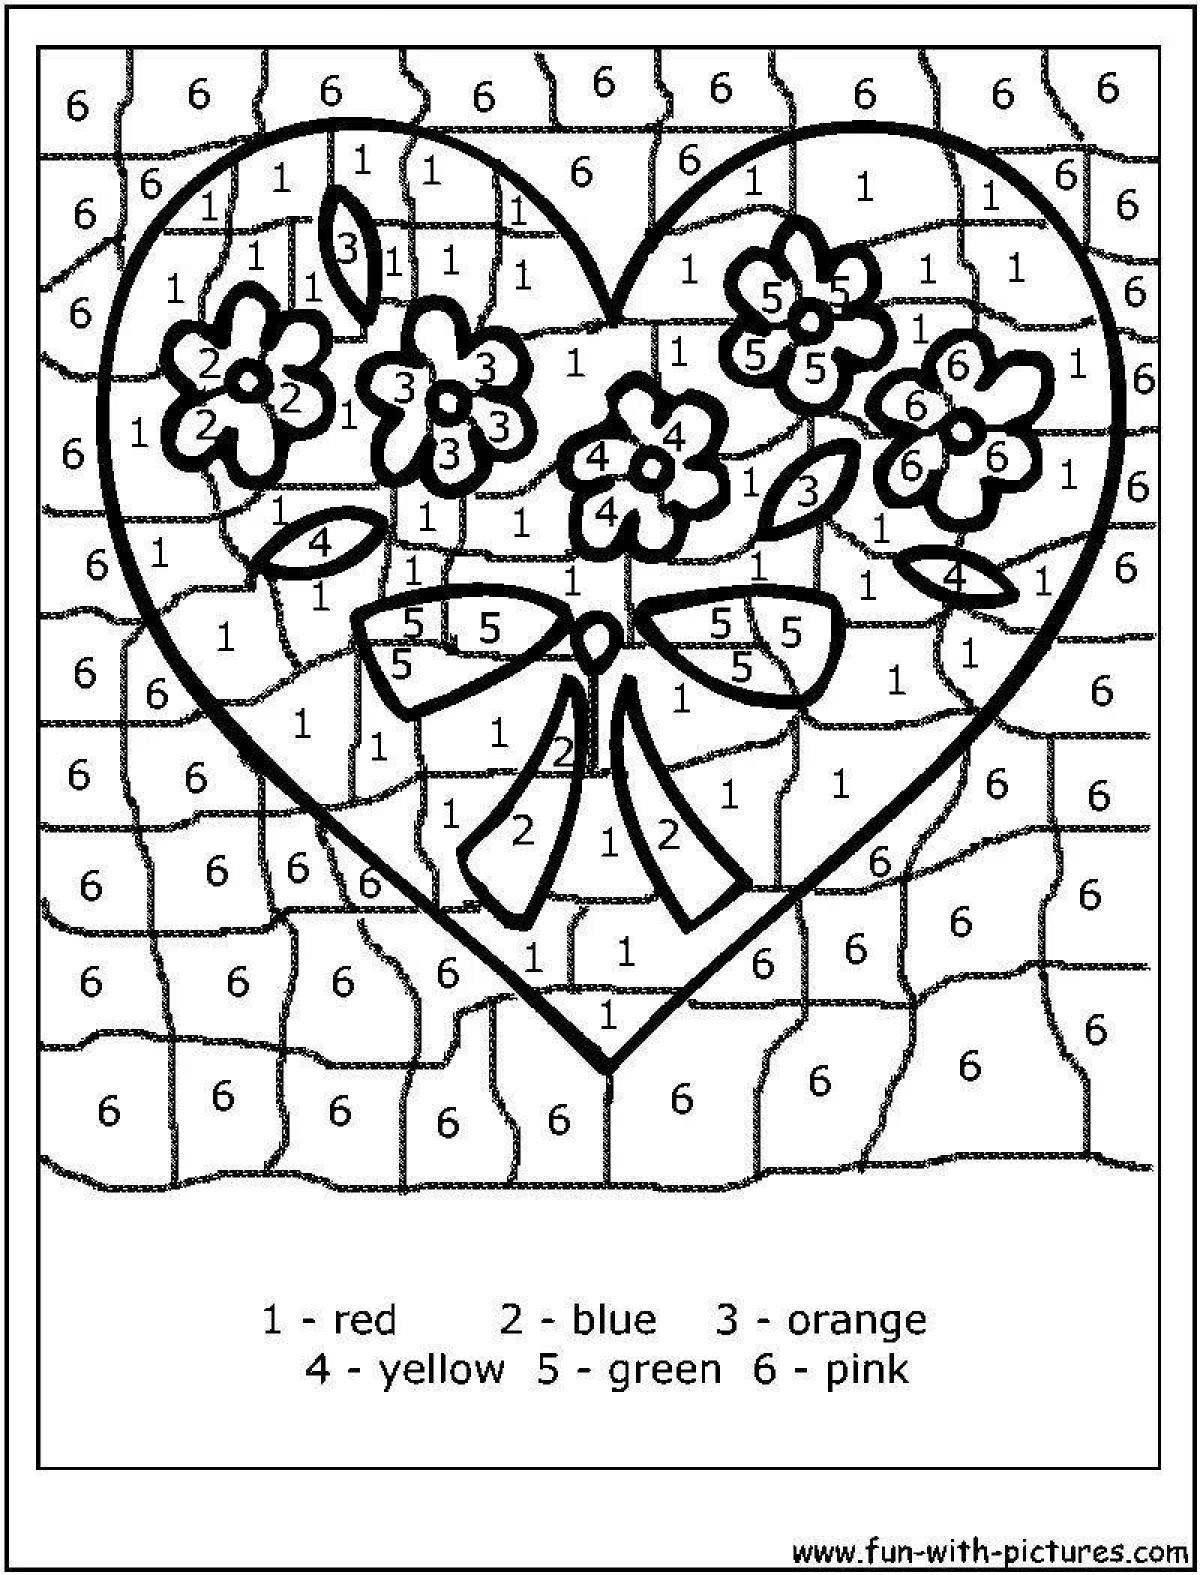 Color-crazy heart number game coloring page